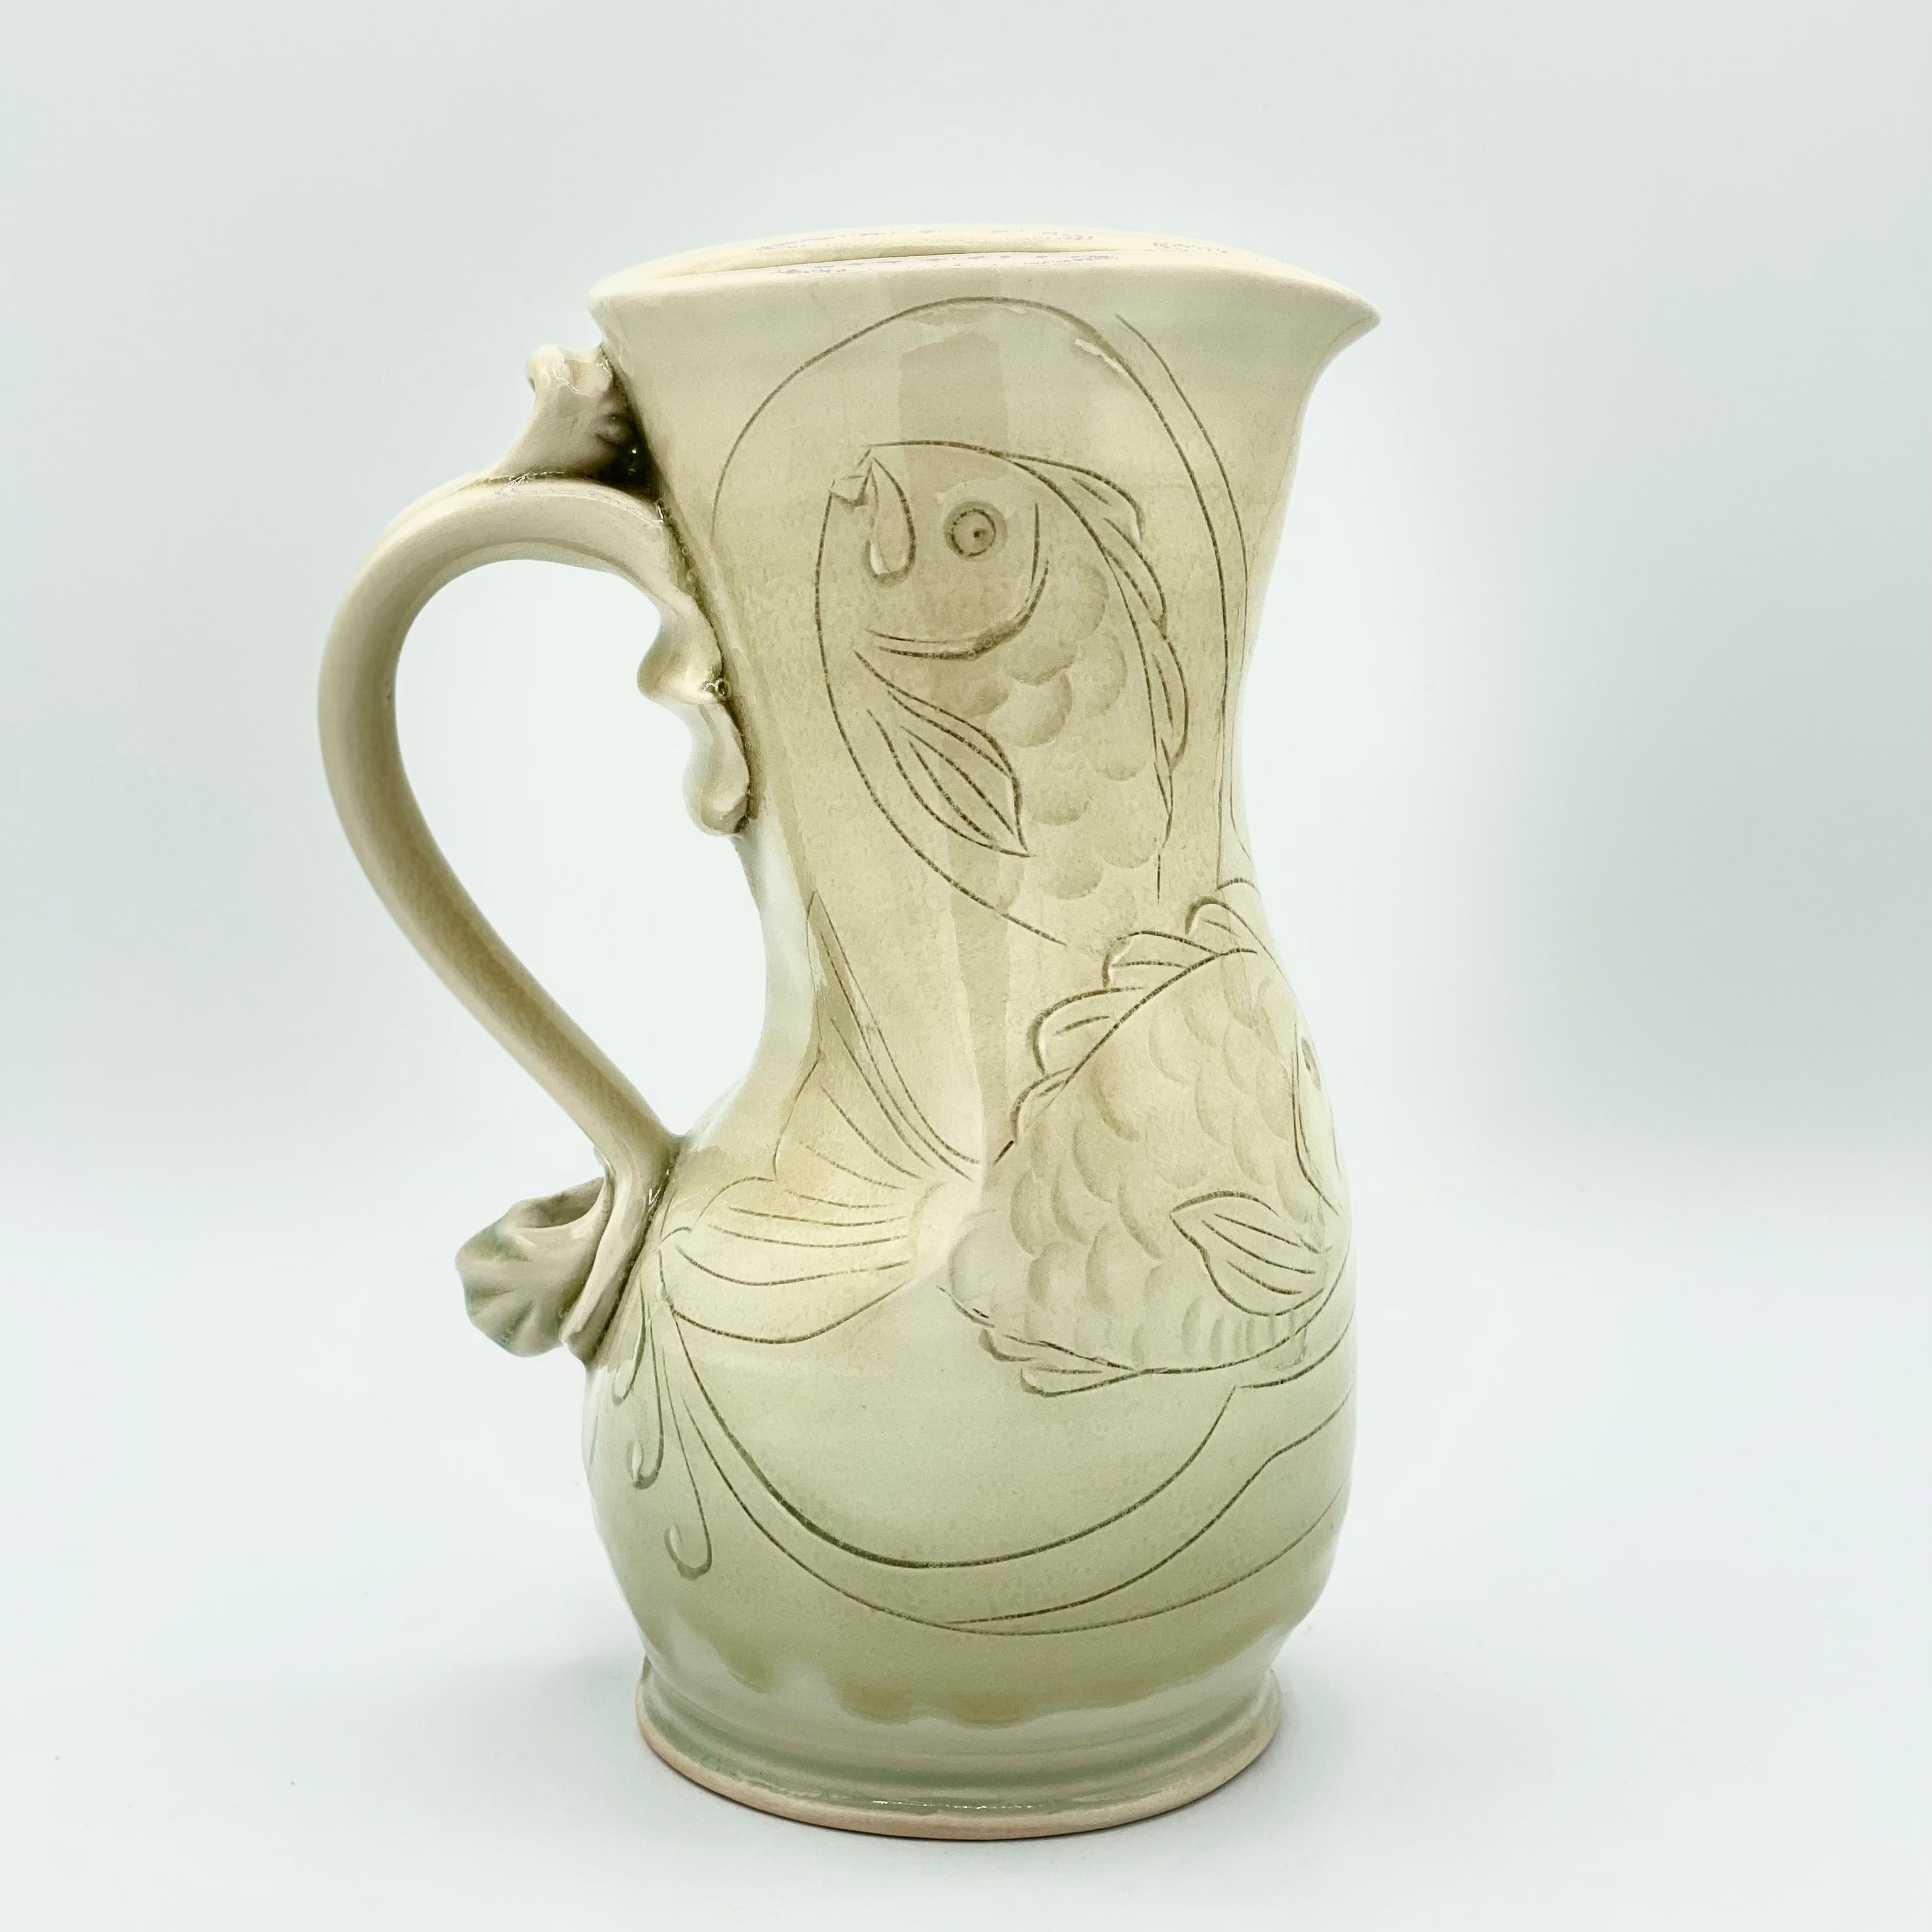 Pitcher by Juggler’s Cove Pottery